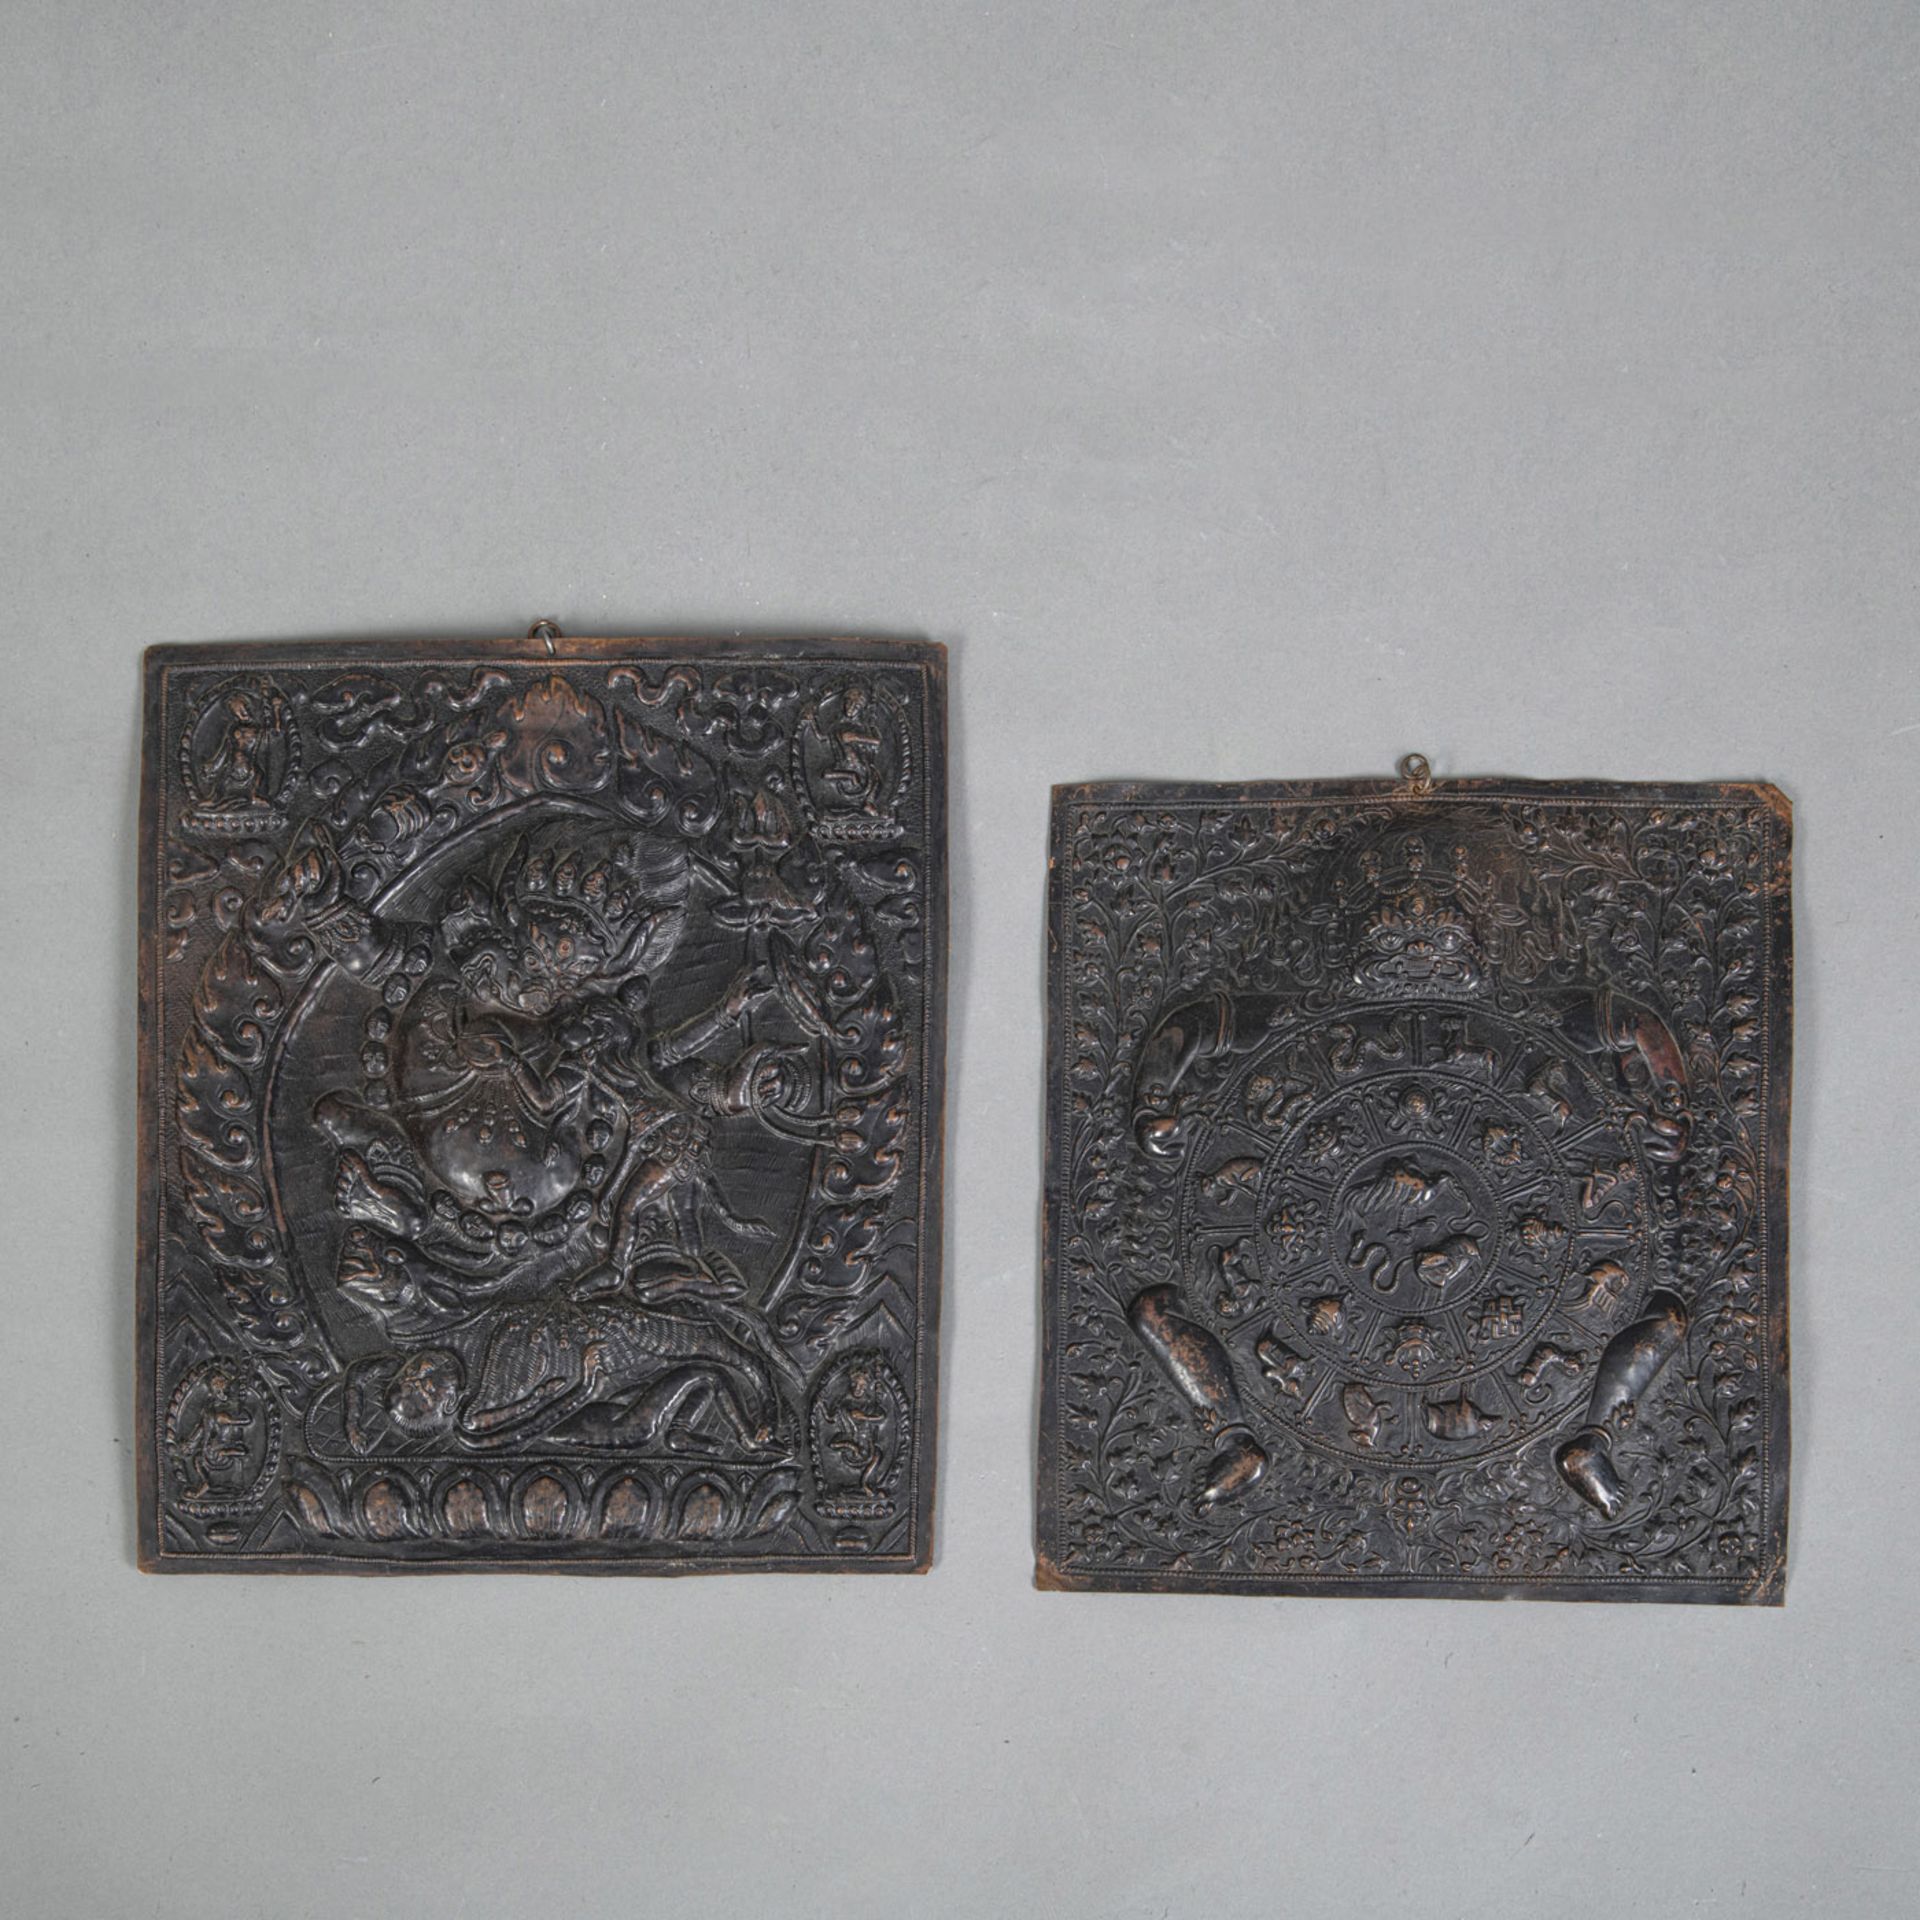 TWO EMBOSSED COPPER RECTANGULAR PLAQUES DEPICTING YAMA AND THE WHEEL OF LIFE